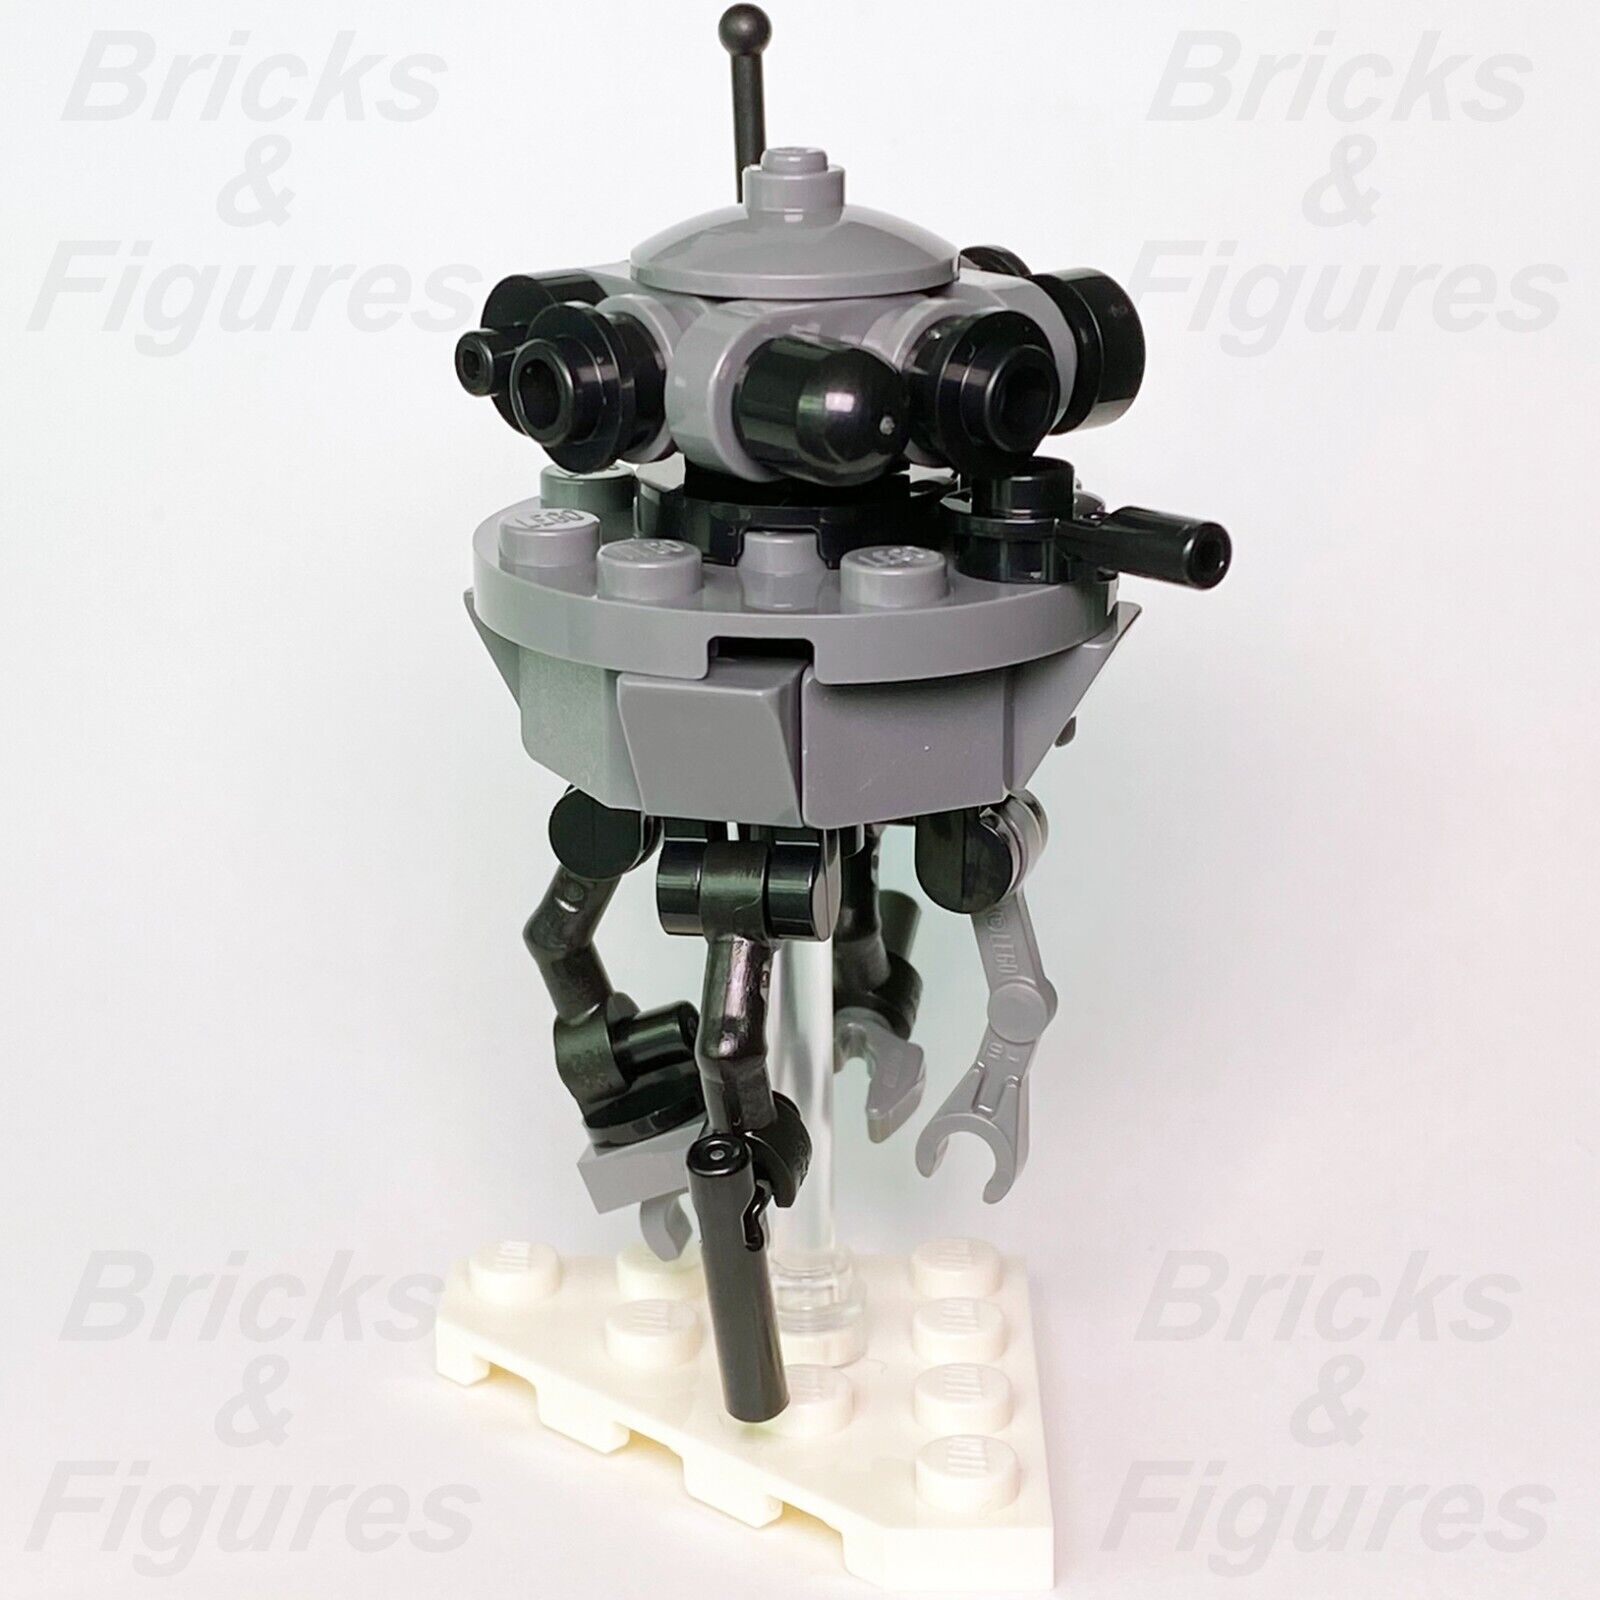 LEGO® Star Wars Imperial Probe Droid Minifigure with Stand 75322 sw1190 Hoth 2